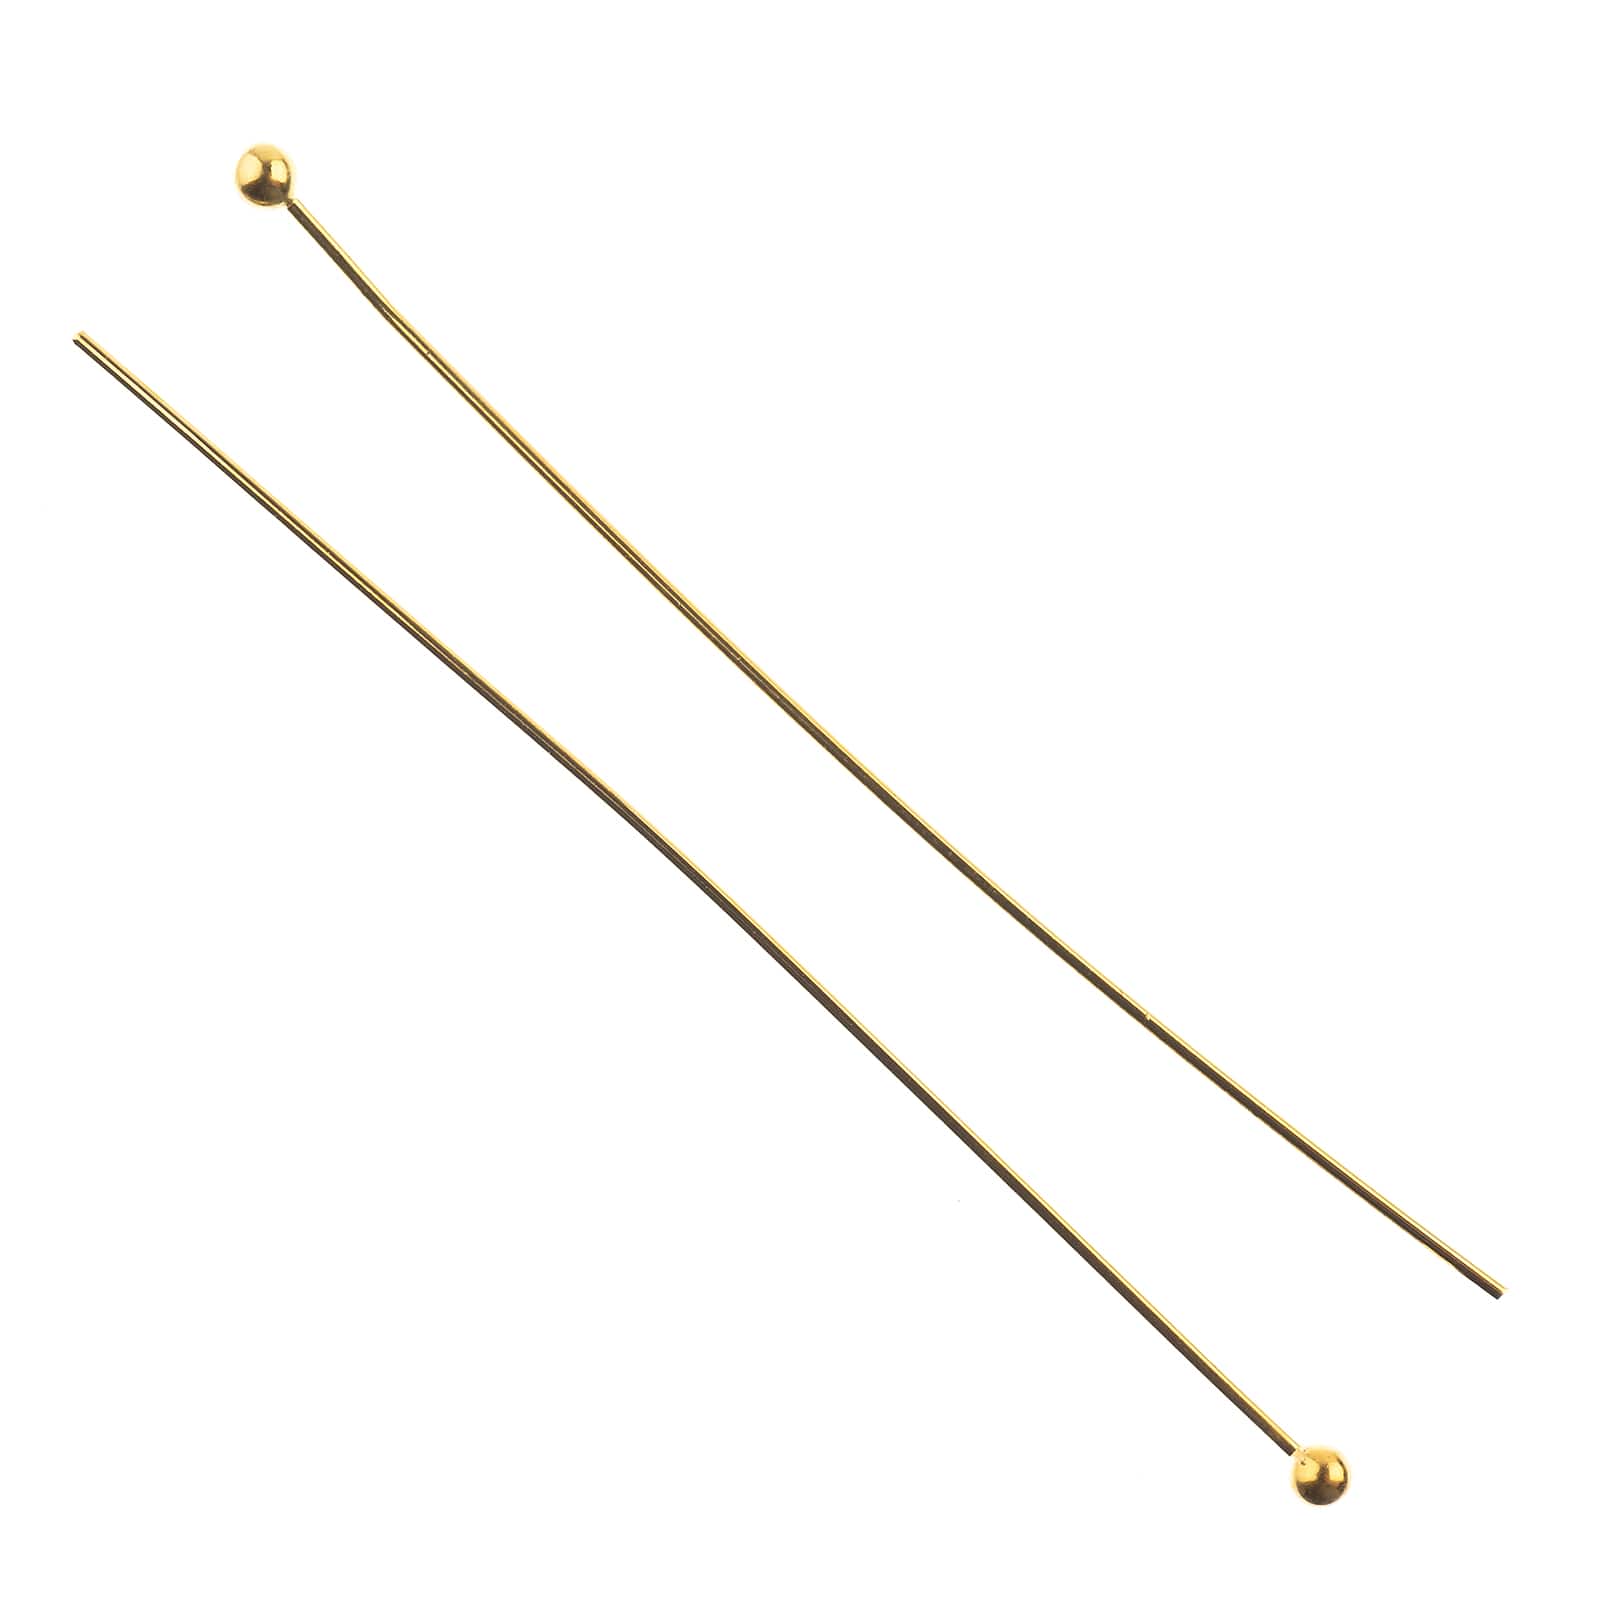 John Bead Must Have Findings 2&#x22; Ball Head Pins, 60ct.